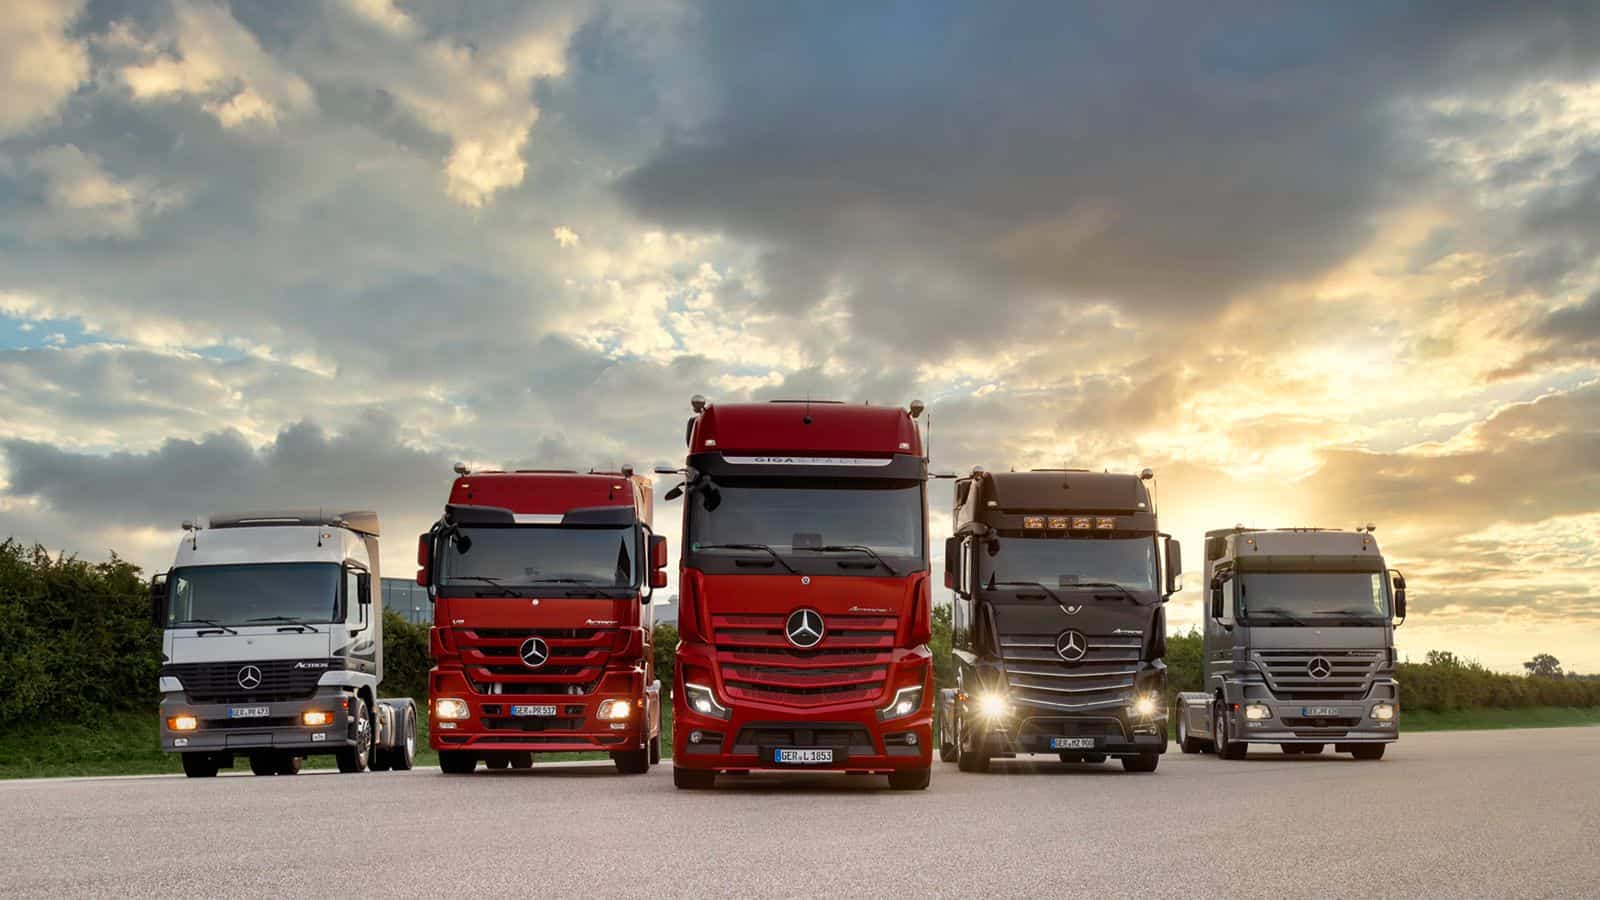 MERCEDES-BENZ TRUCKS Celebrates 125 Years of Leadership and Excellence